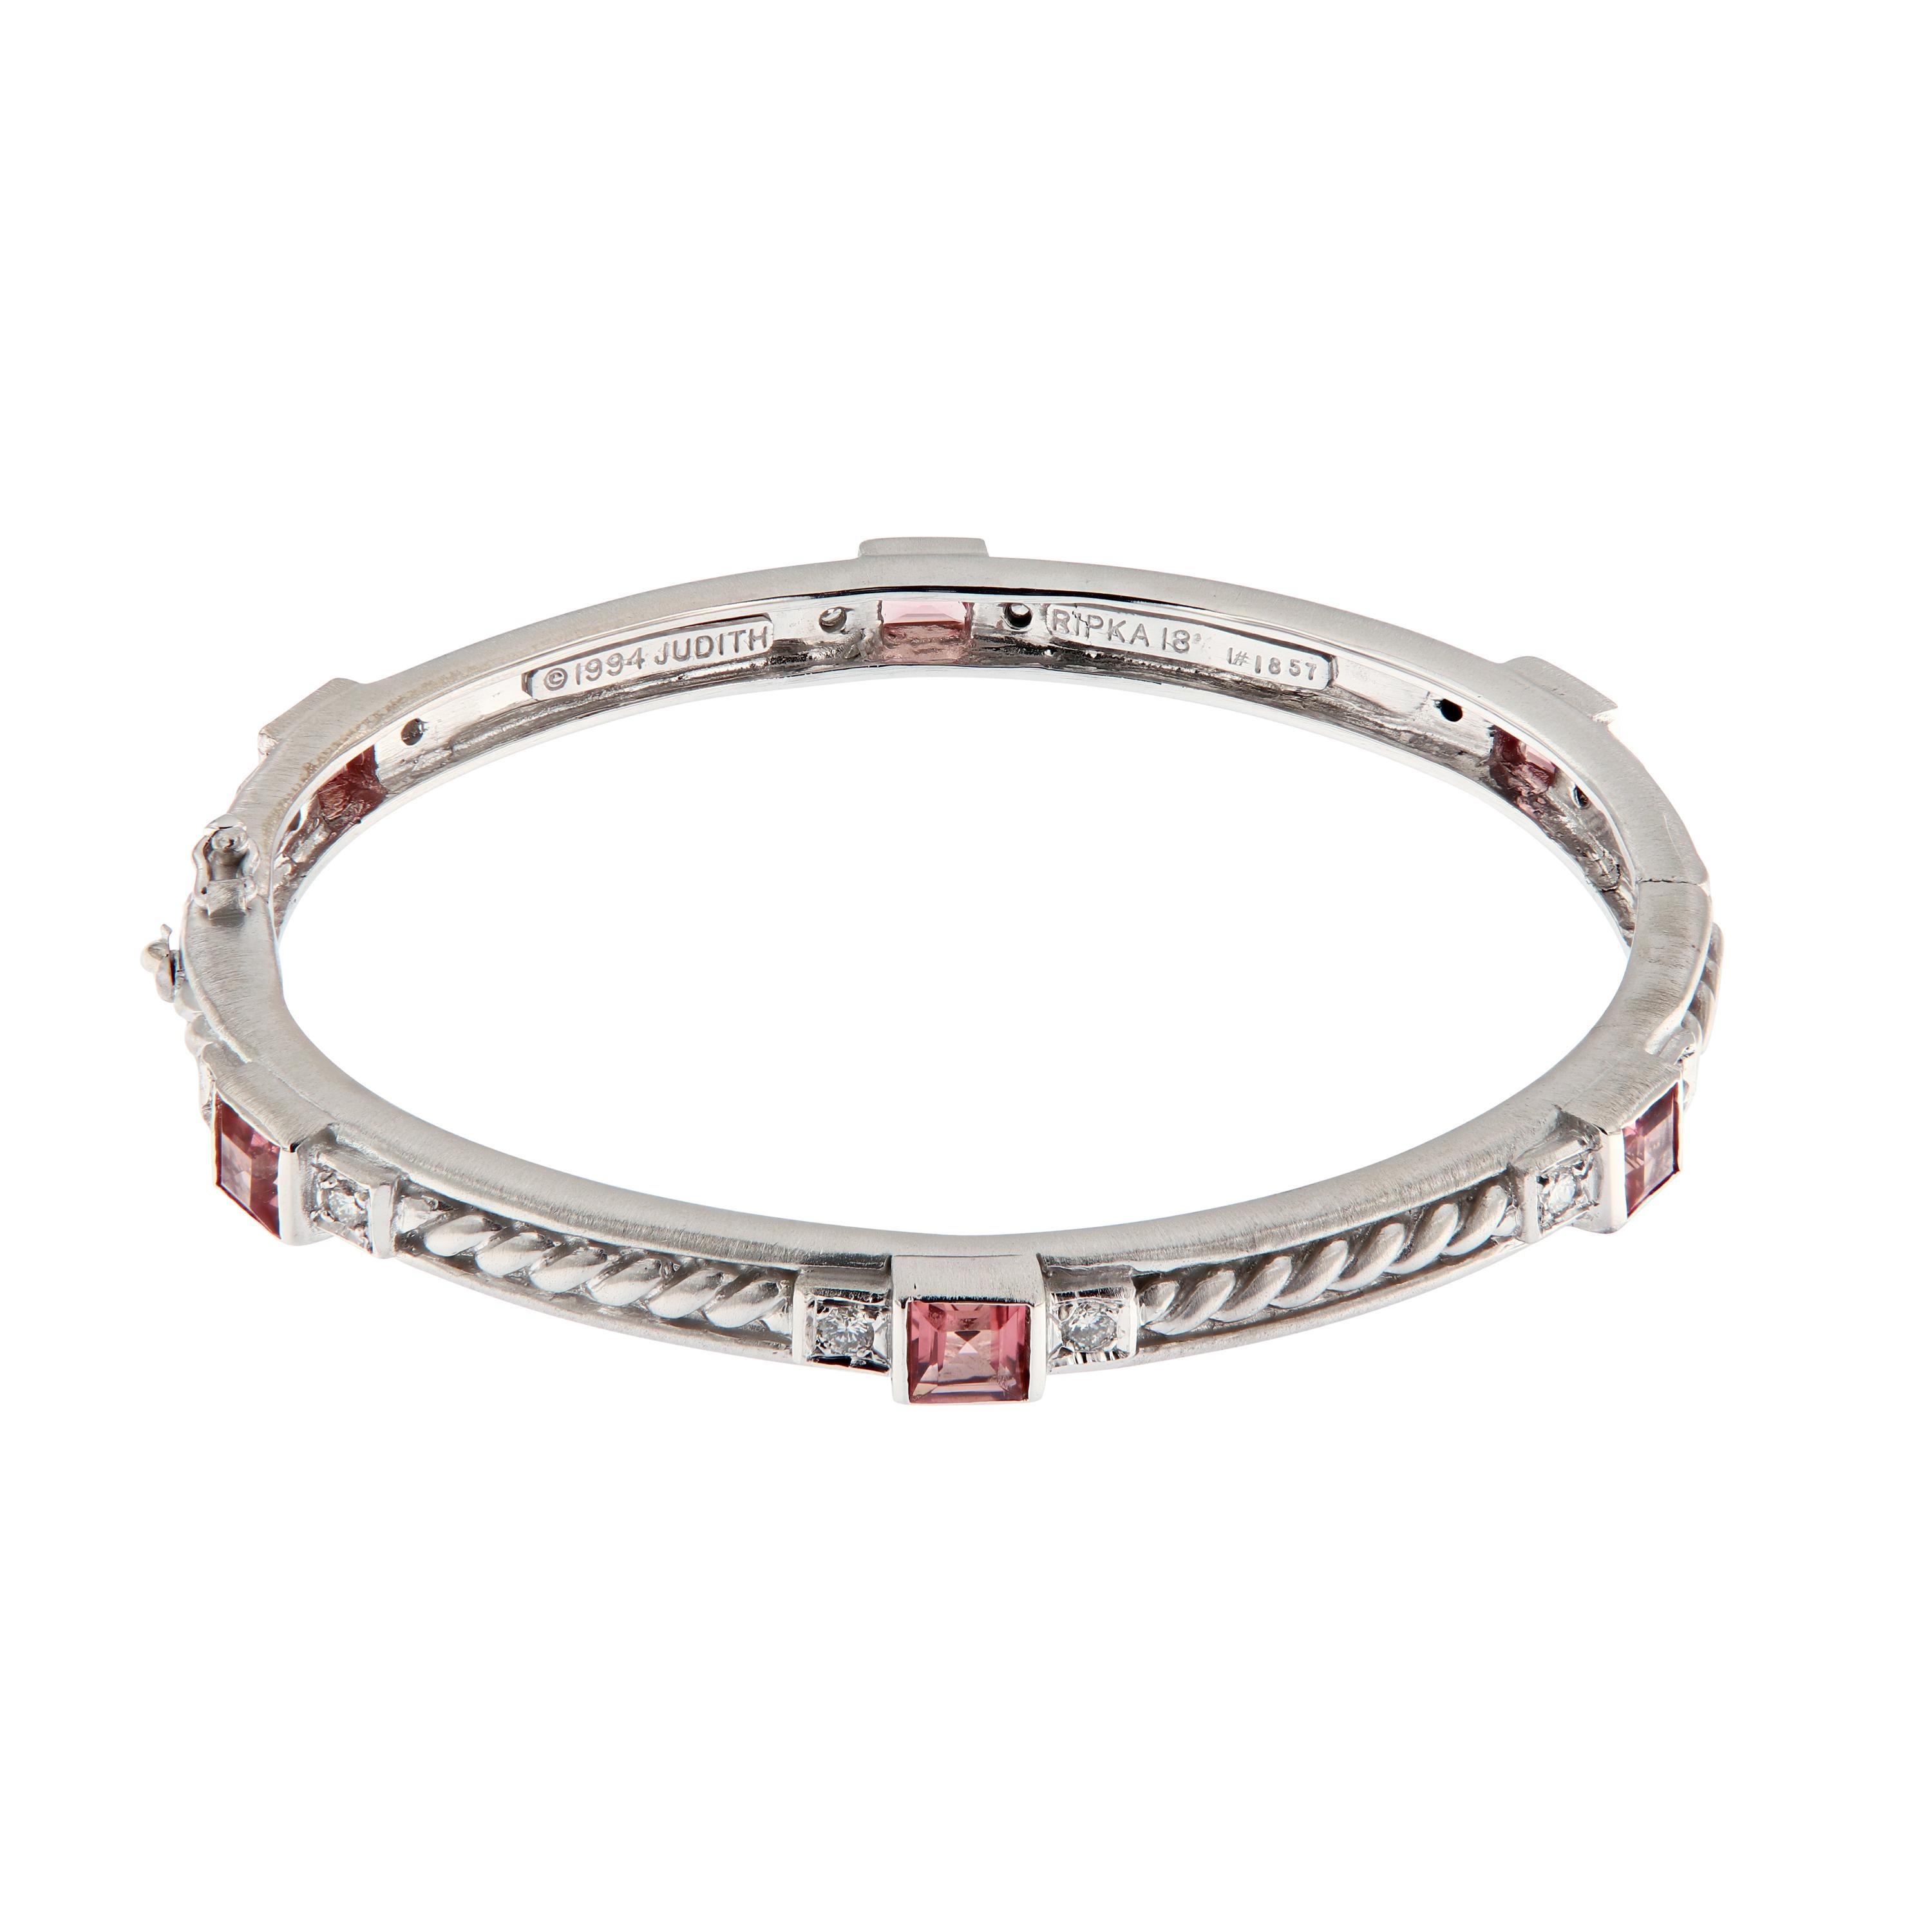 Exquisitely crafted by Judith Ripka in 18k white gold. This bangle bracelet is oval in shape and features a rope design accented with pink tourmalines and white diamonds. This Estate piece is in excellent condition and comes with the original pouch.